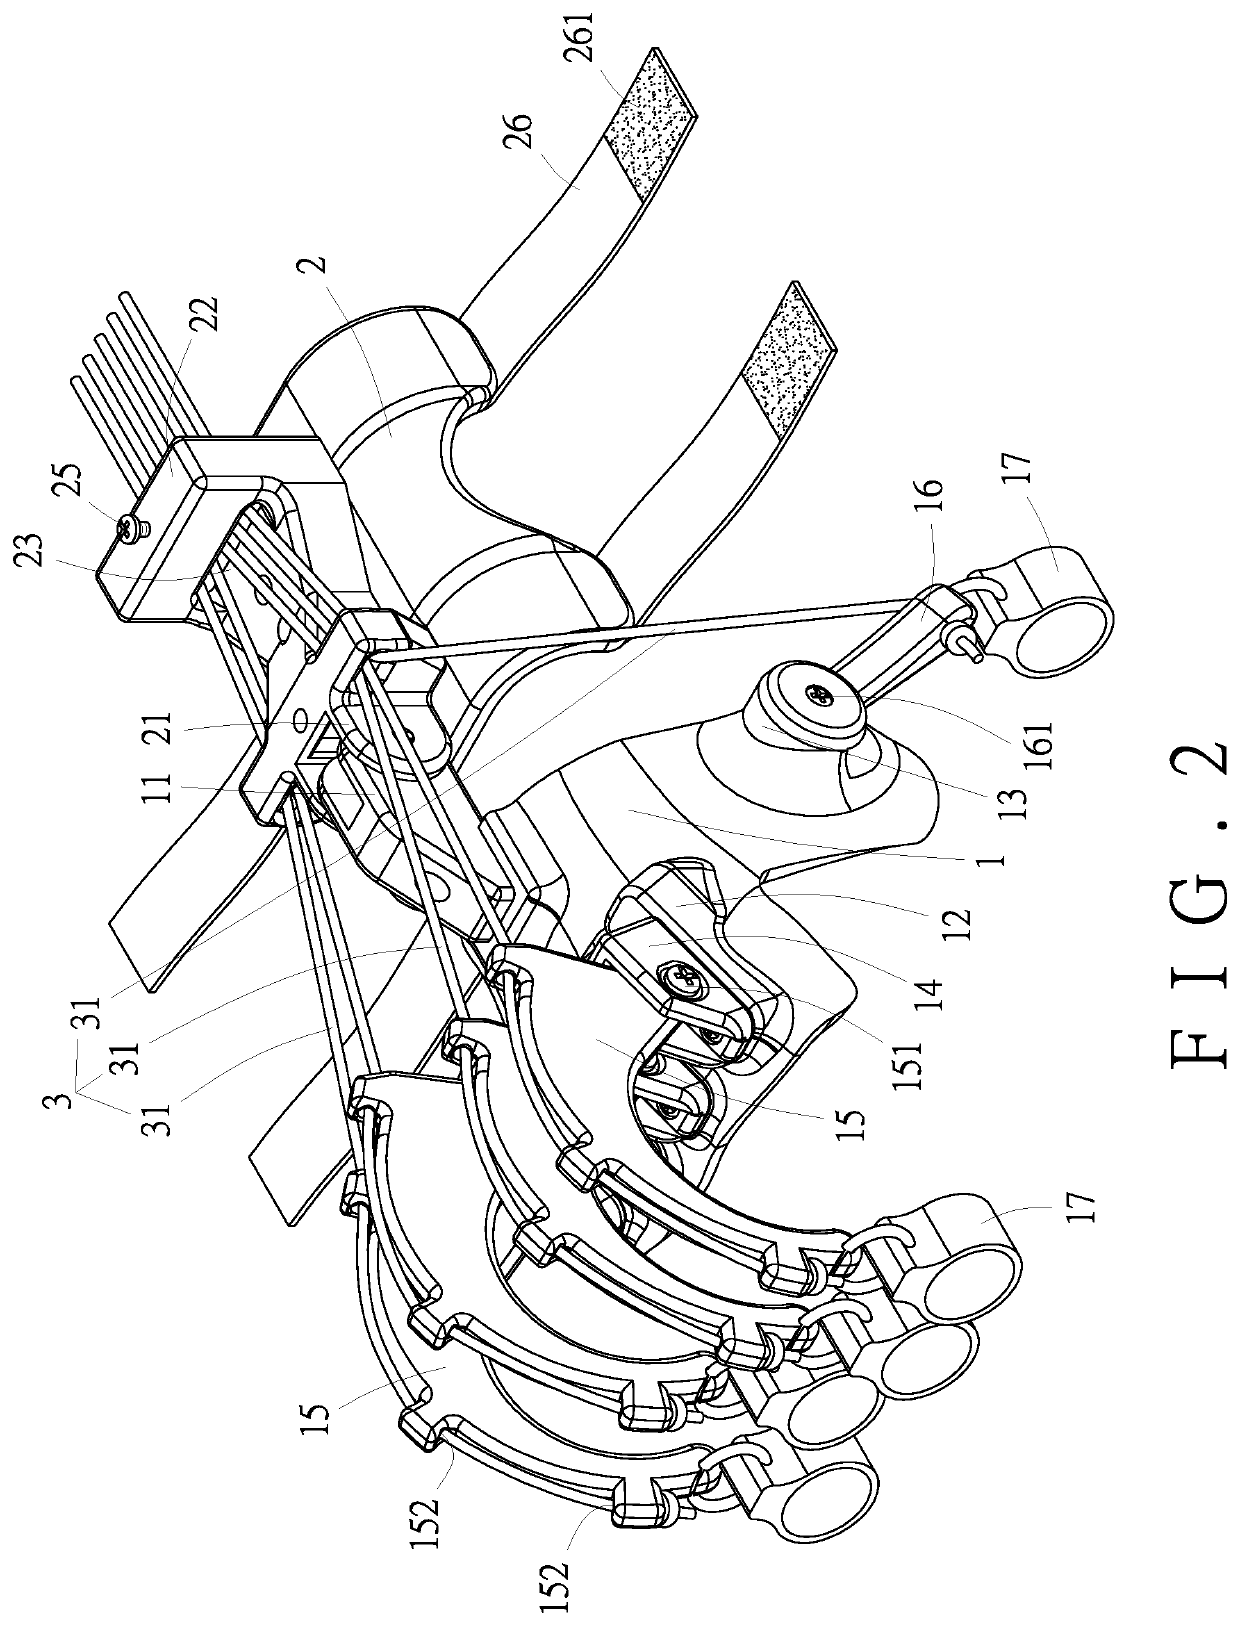 Tension adjustment structure of hand rehabilitation device